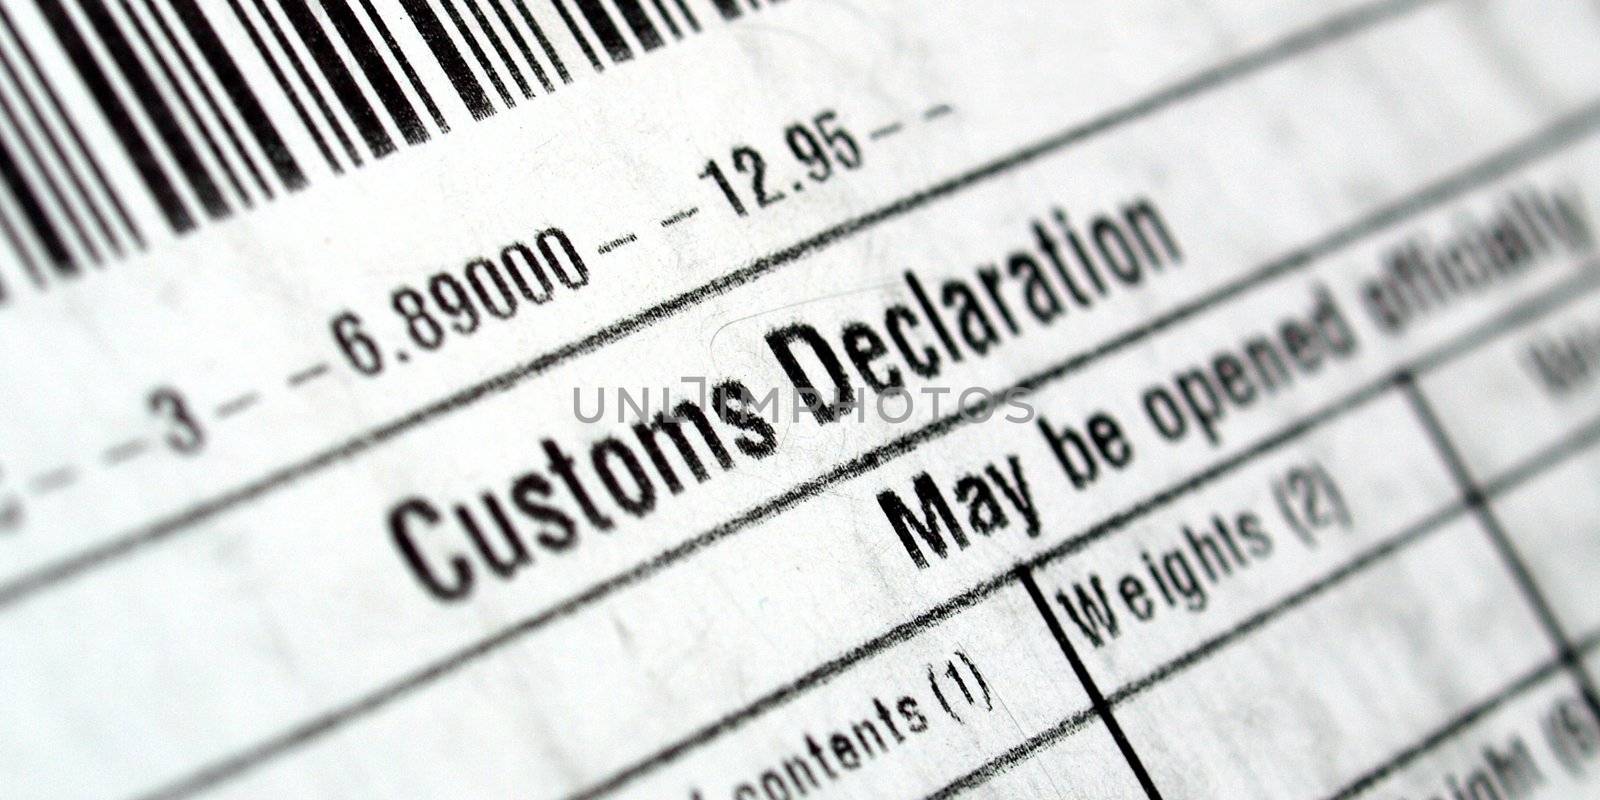 Customs declaration on a foreign packet parcel